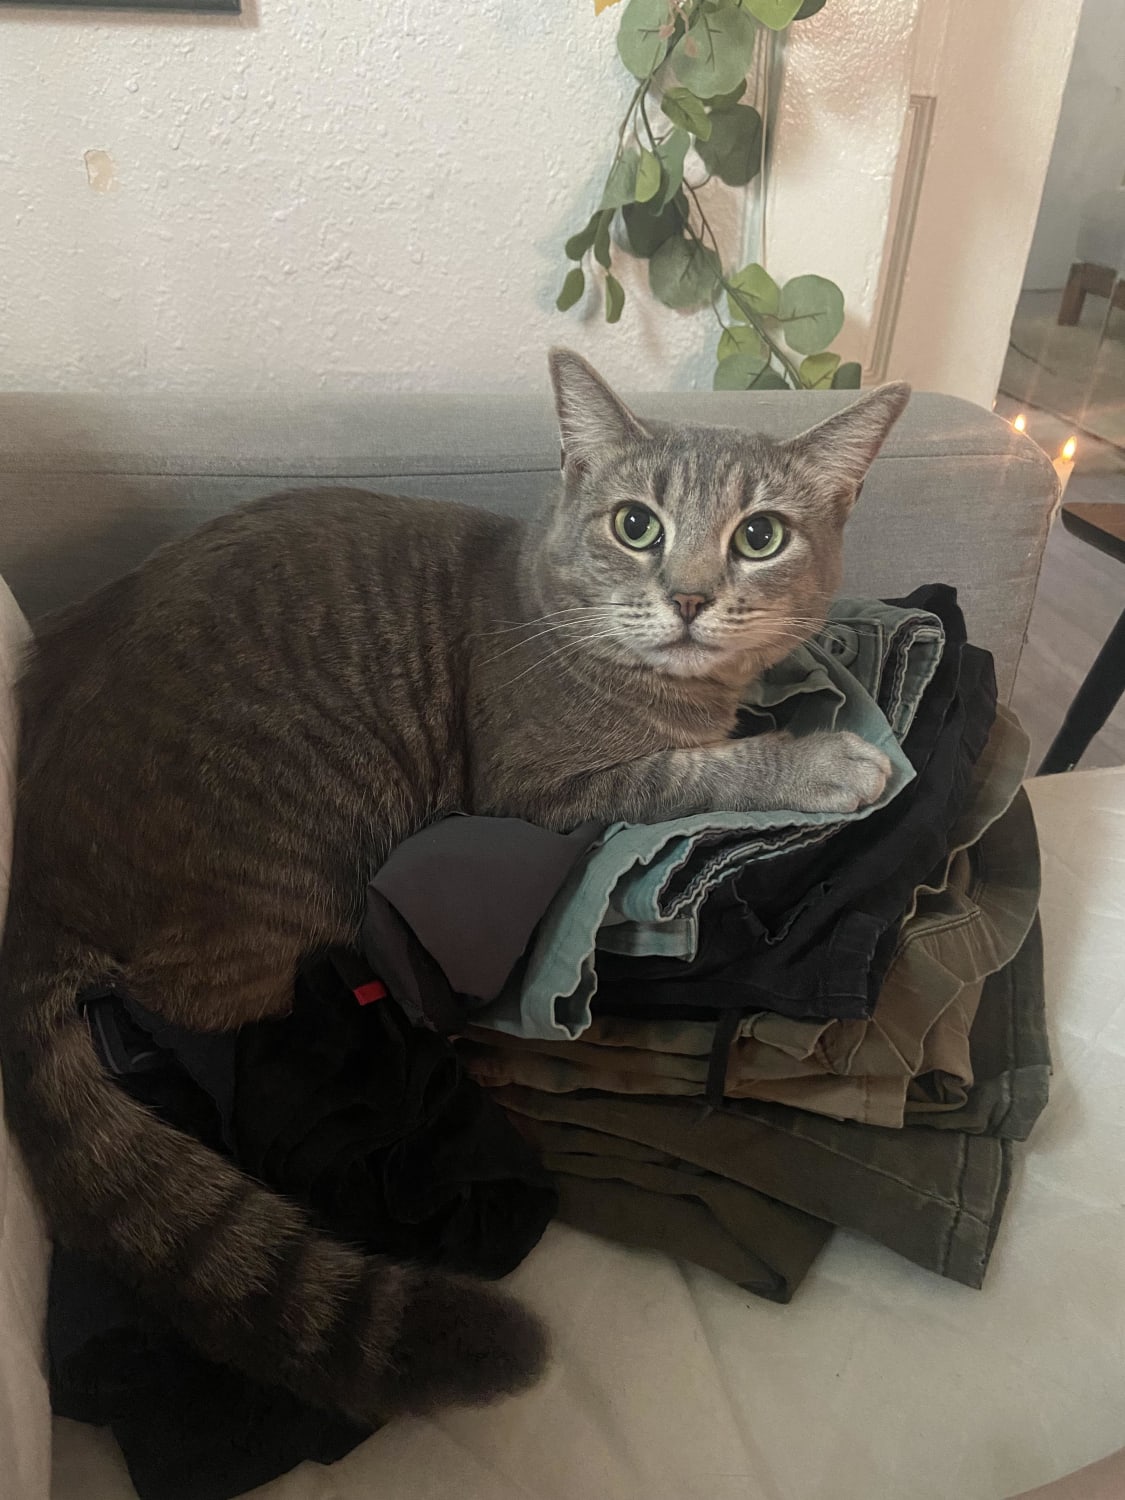 Millie hard at work sorting and folding laundry